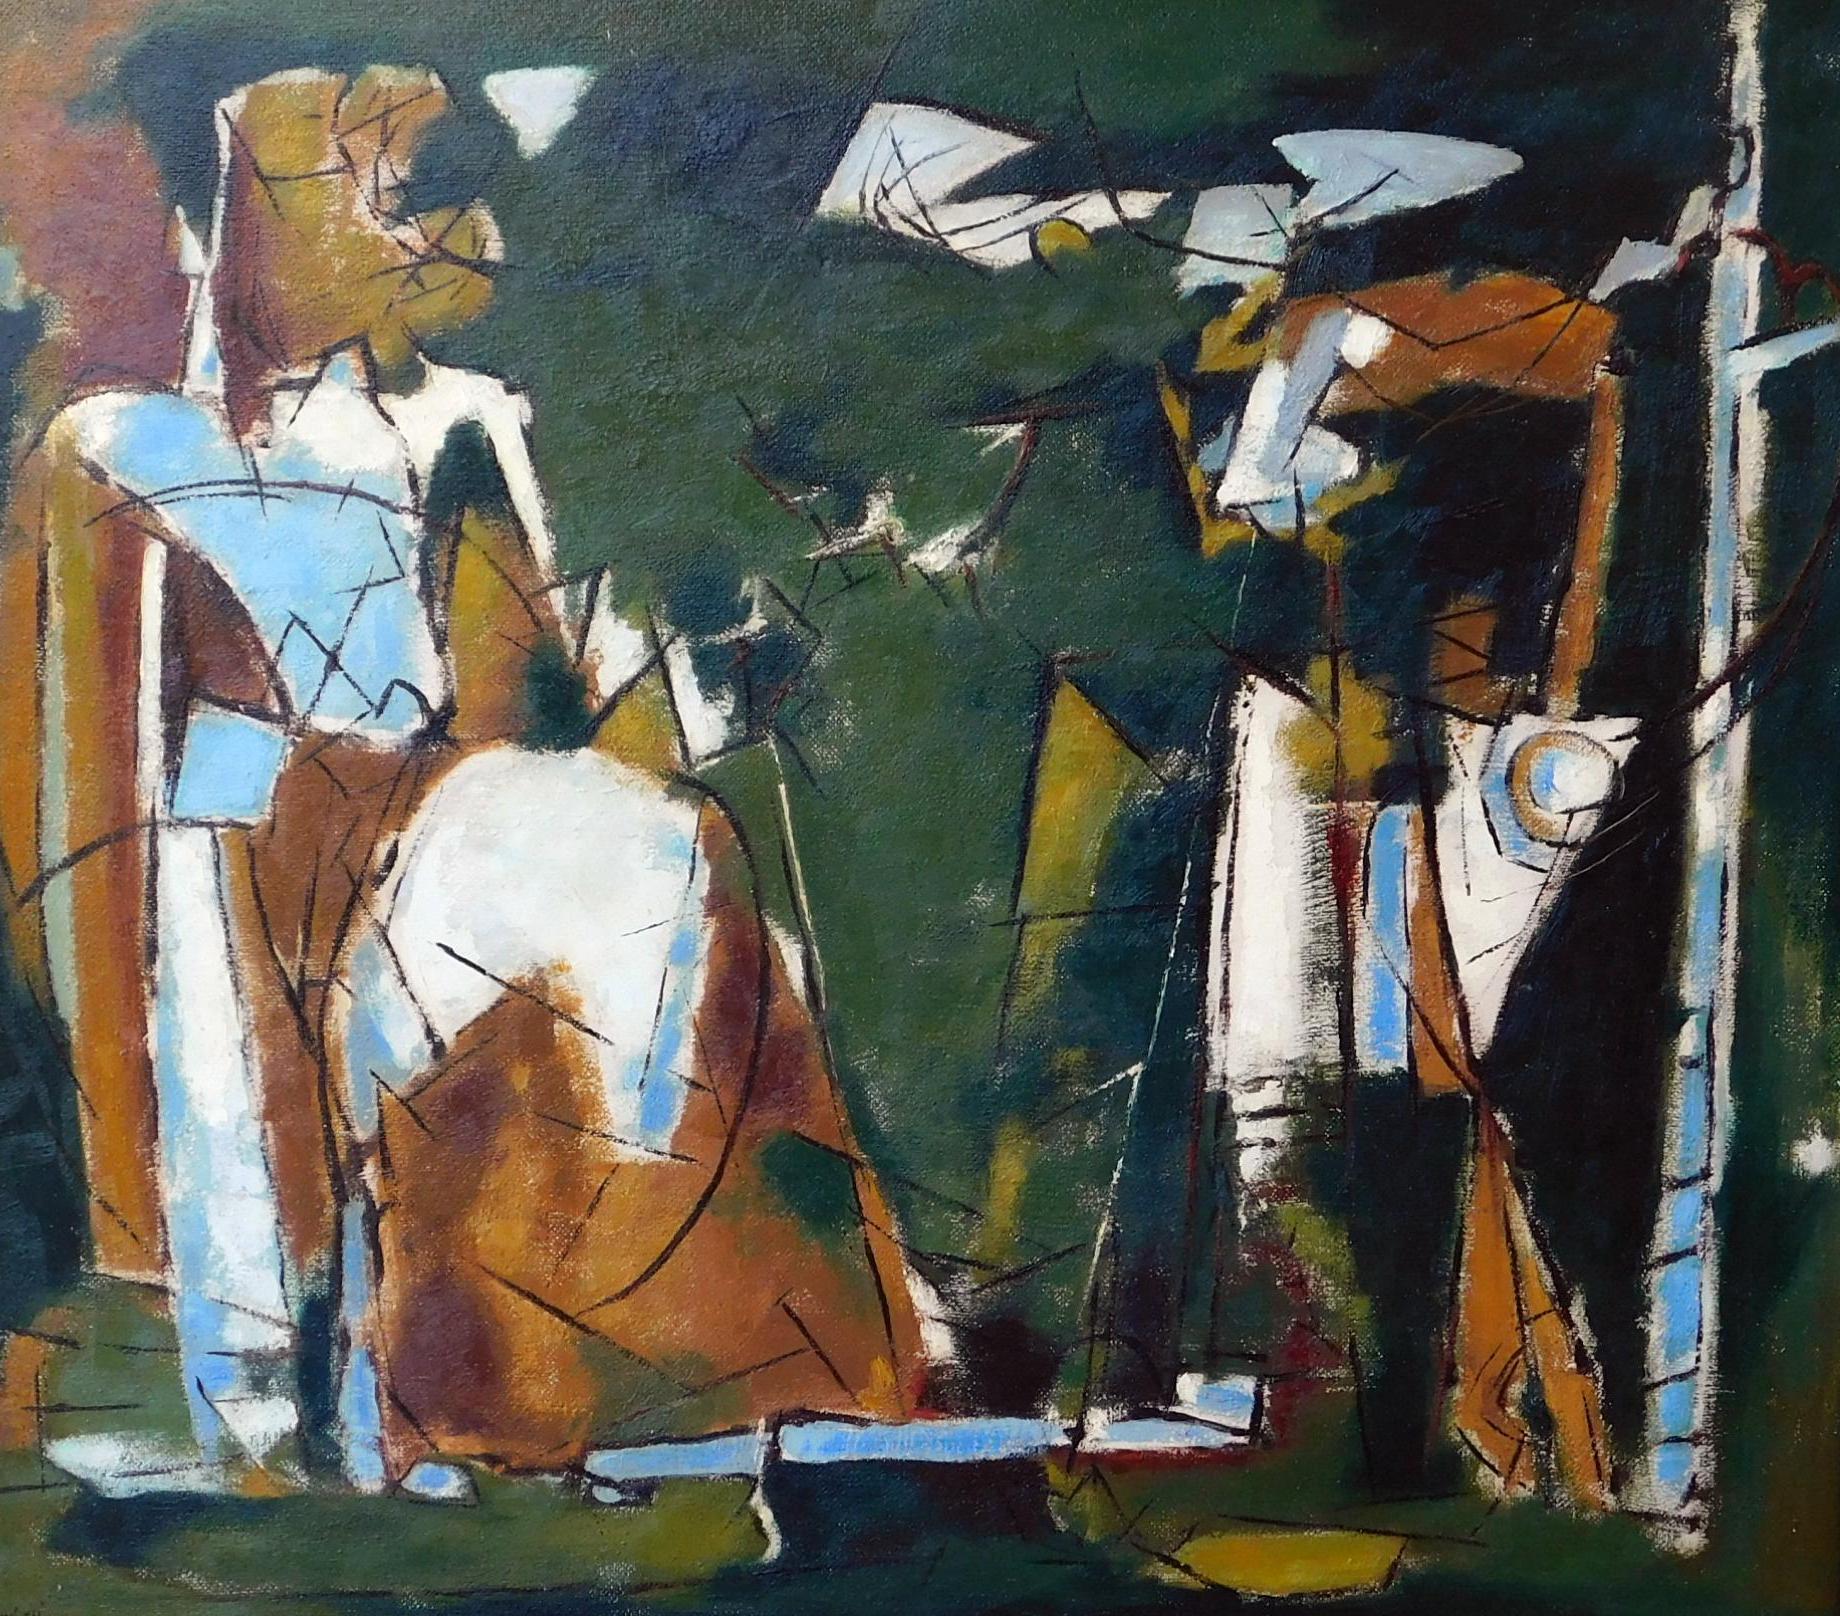 Harry Crowley NYC Abstract Expressionist Painting, circa 1954, Slow Solitude In Good Condition For Sale In Phoenix, AZ